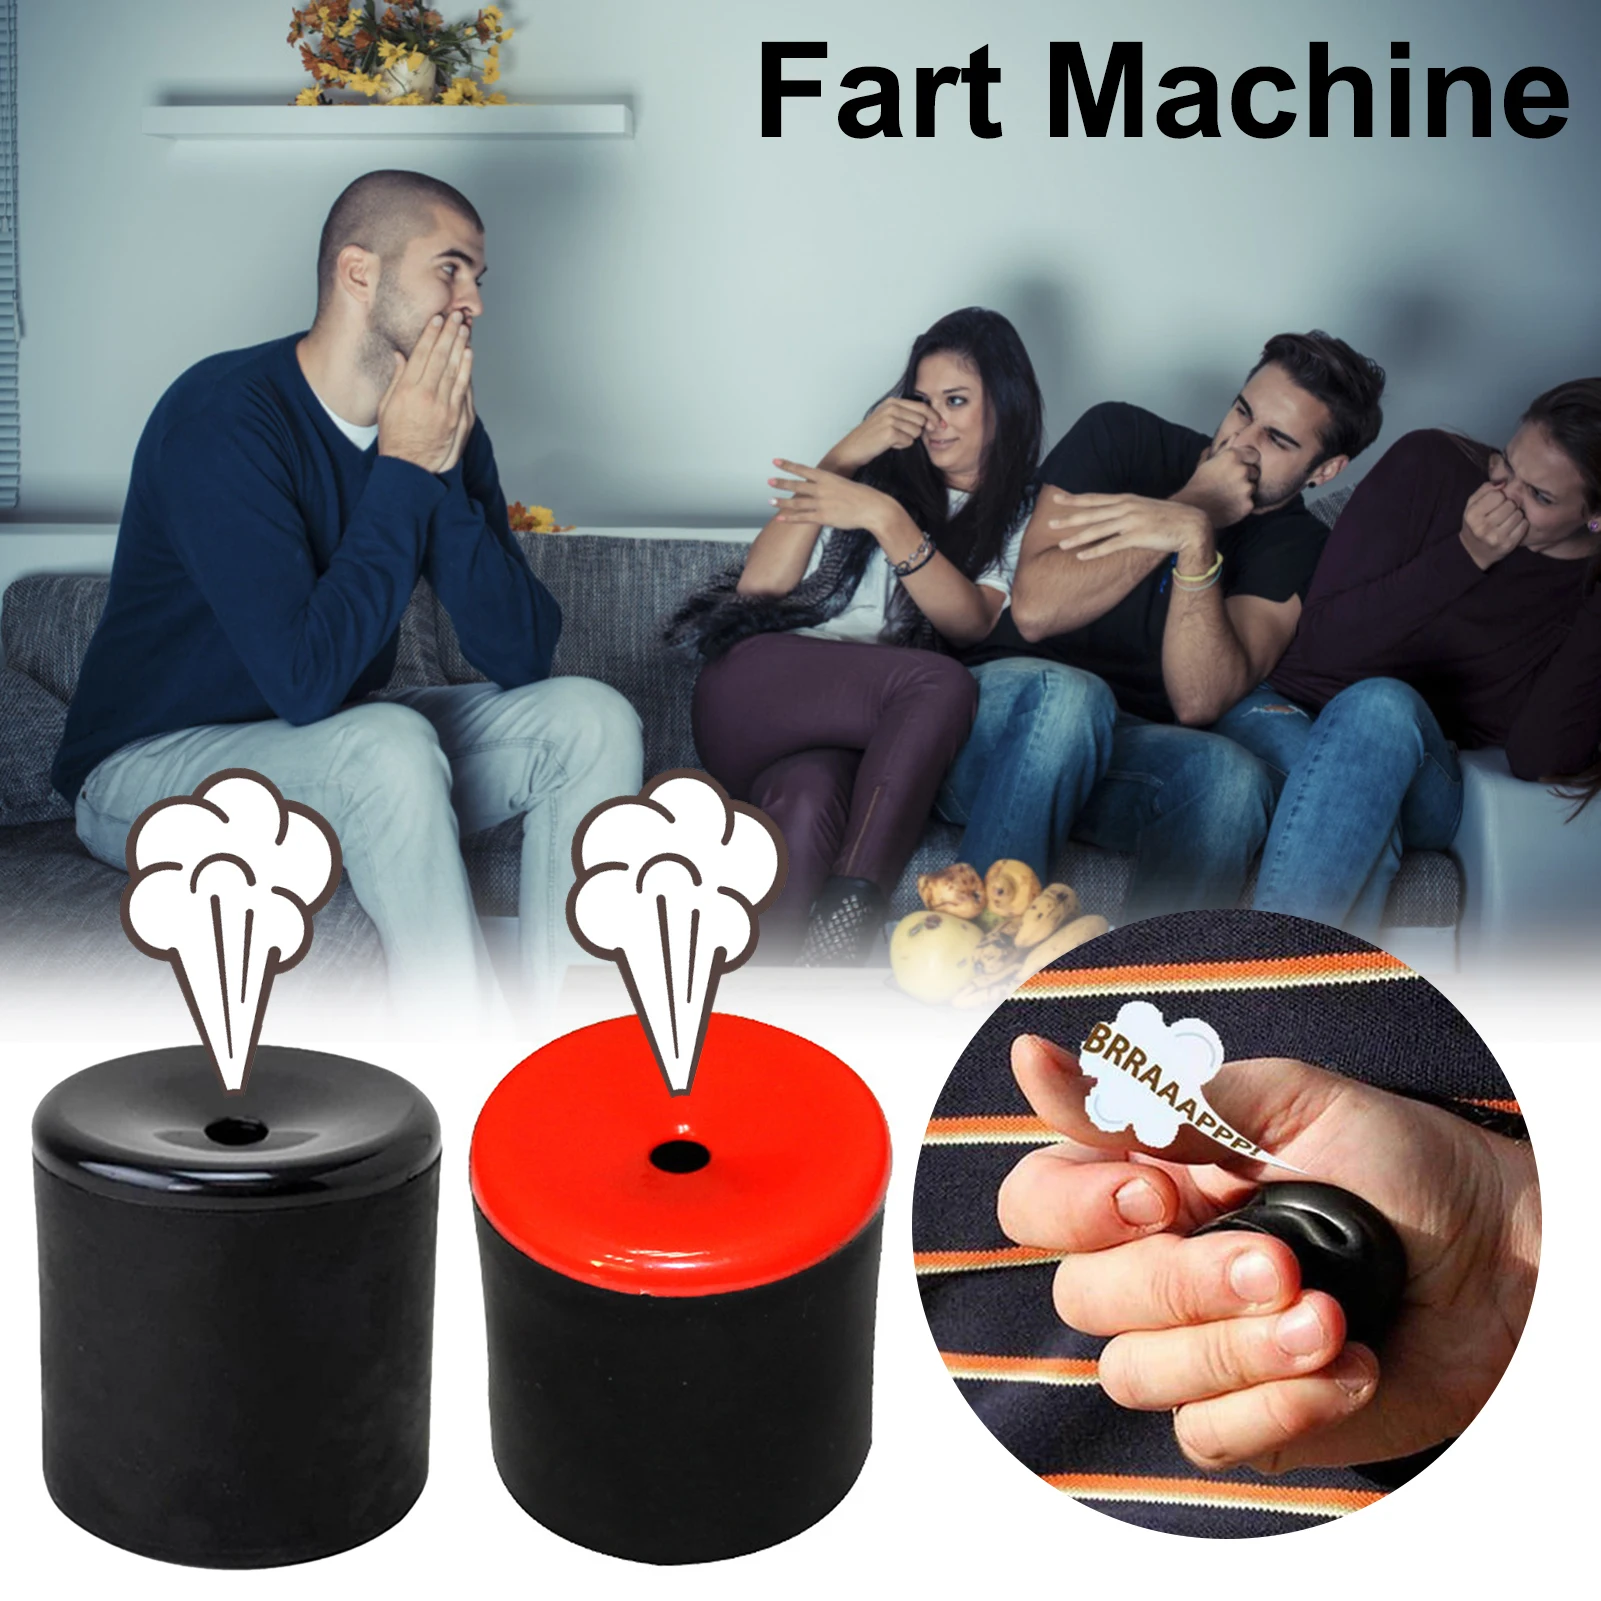 Ivyday Funny Realistic Farting Sounds Fart Pooter Gag Prank Noise Machine Joke Innovative Tricky Prop Toy